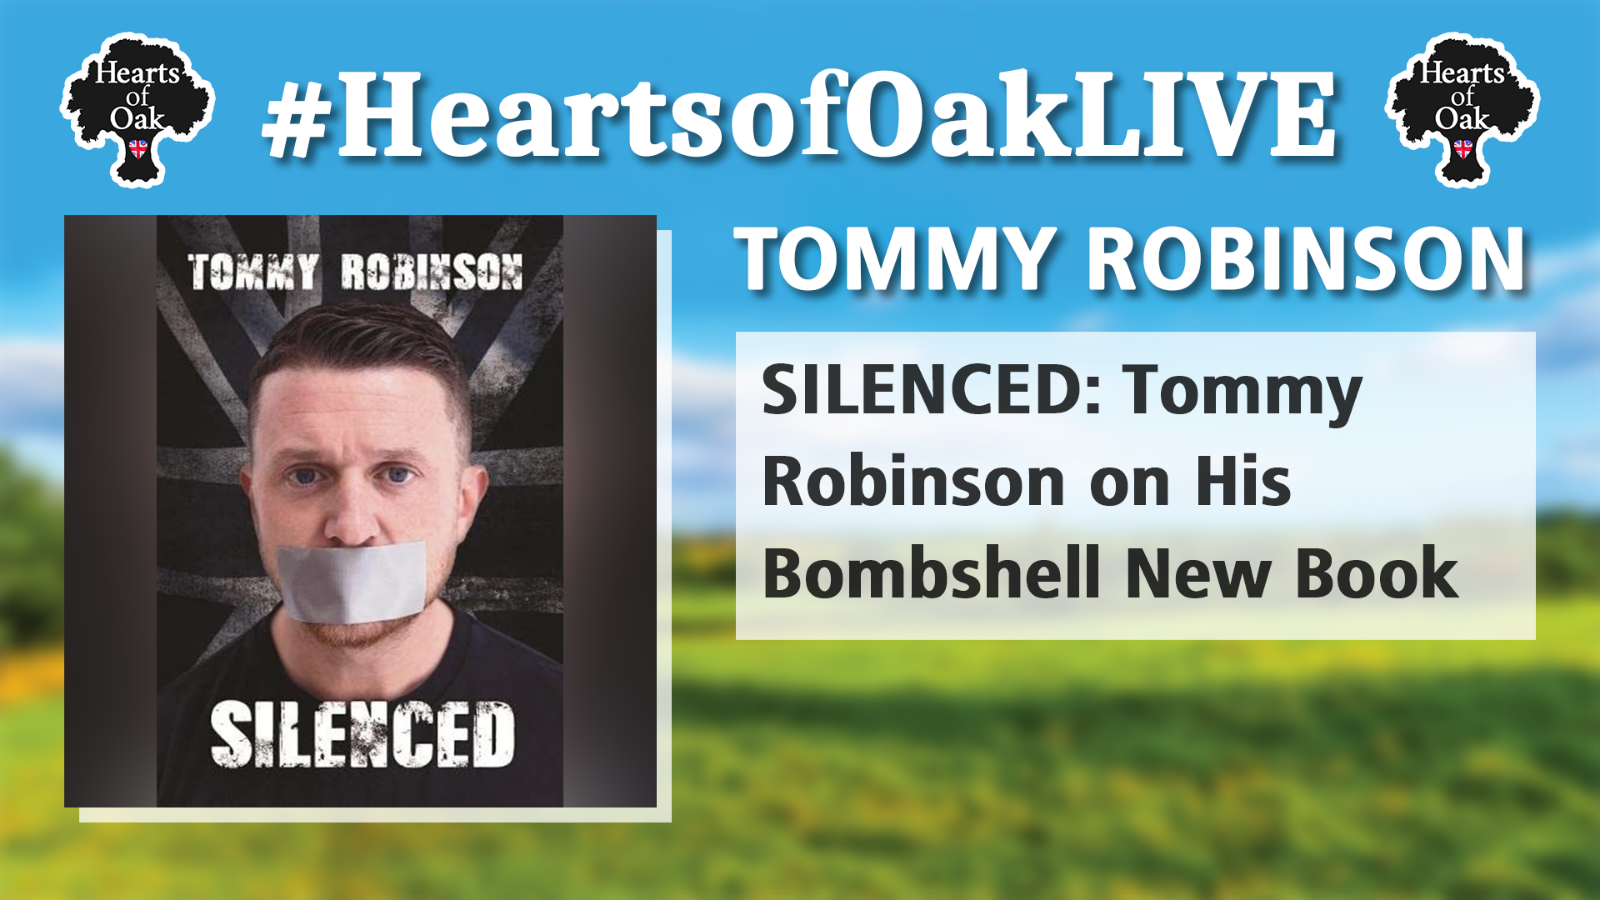 Tommy Robinson - SILENCED: His Bombshell New Book